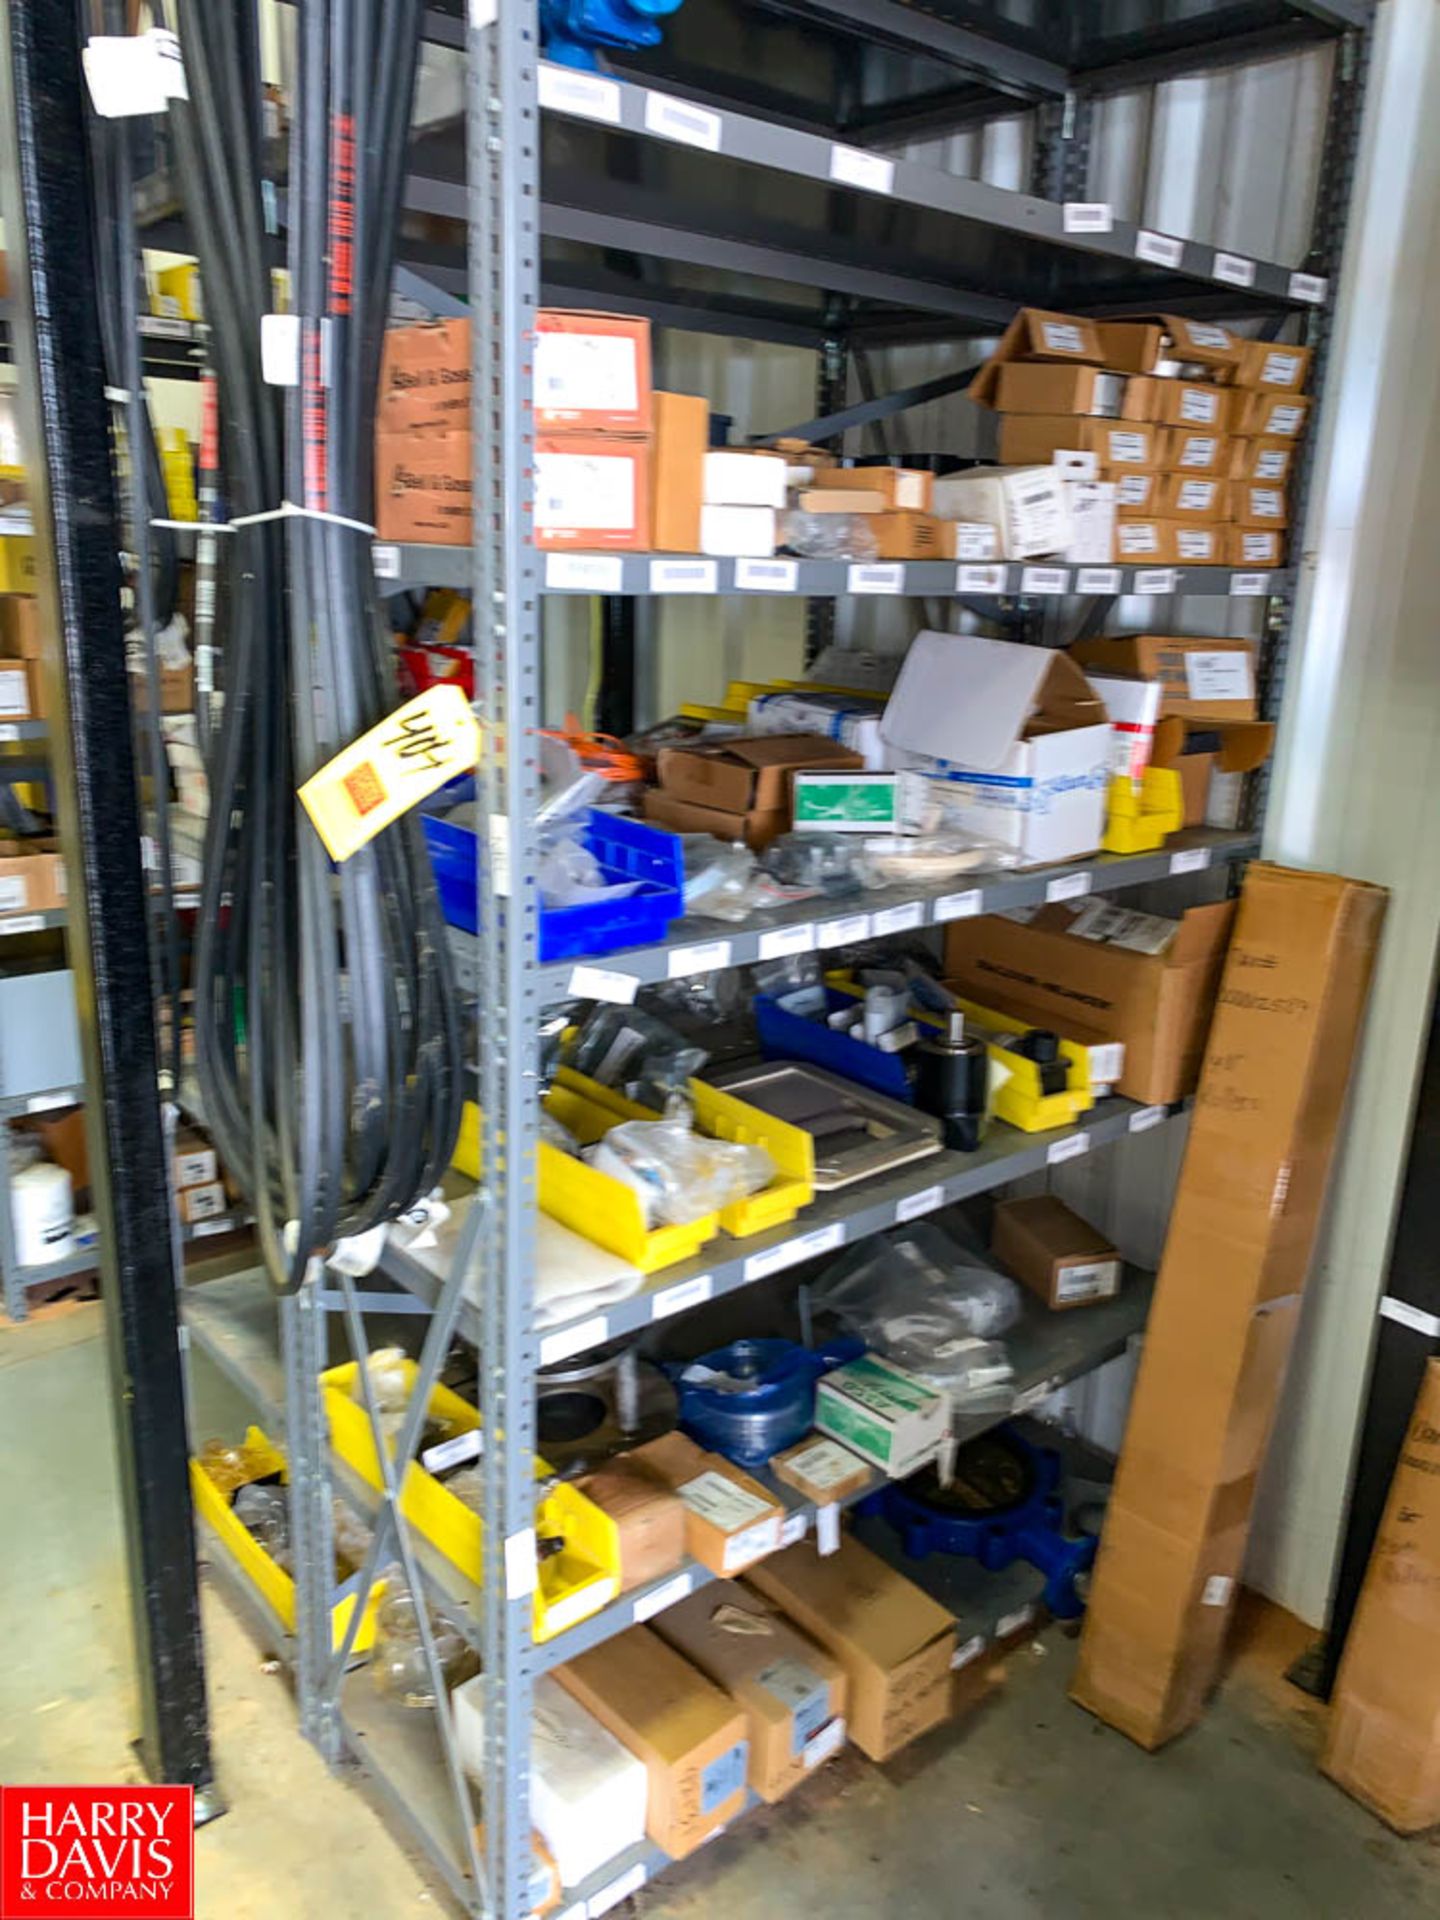 NEW PVC Pipe Fittings, UF System Parts, ASCO Solenoids, and Valves, with (2) Sections Steel Shelving